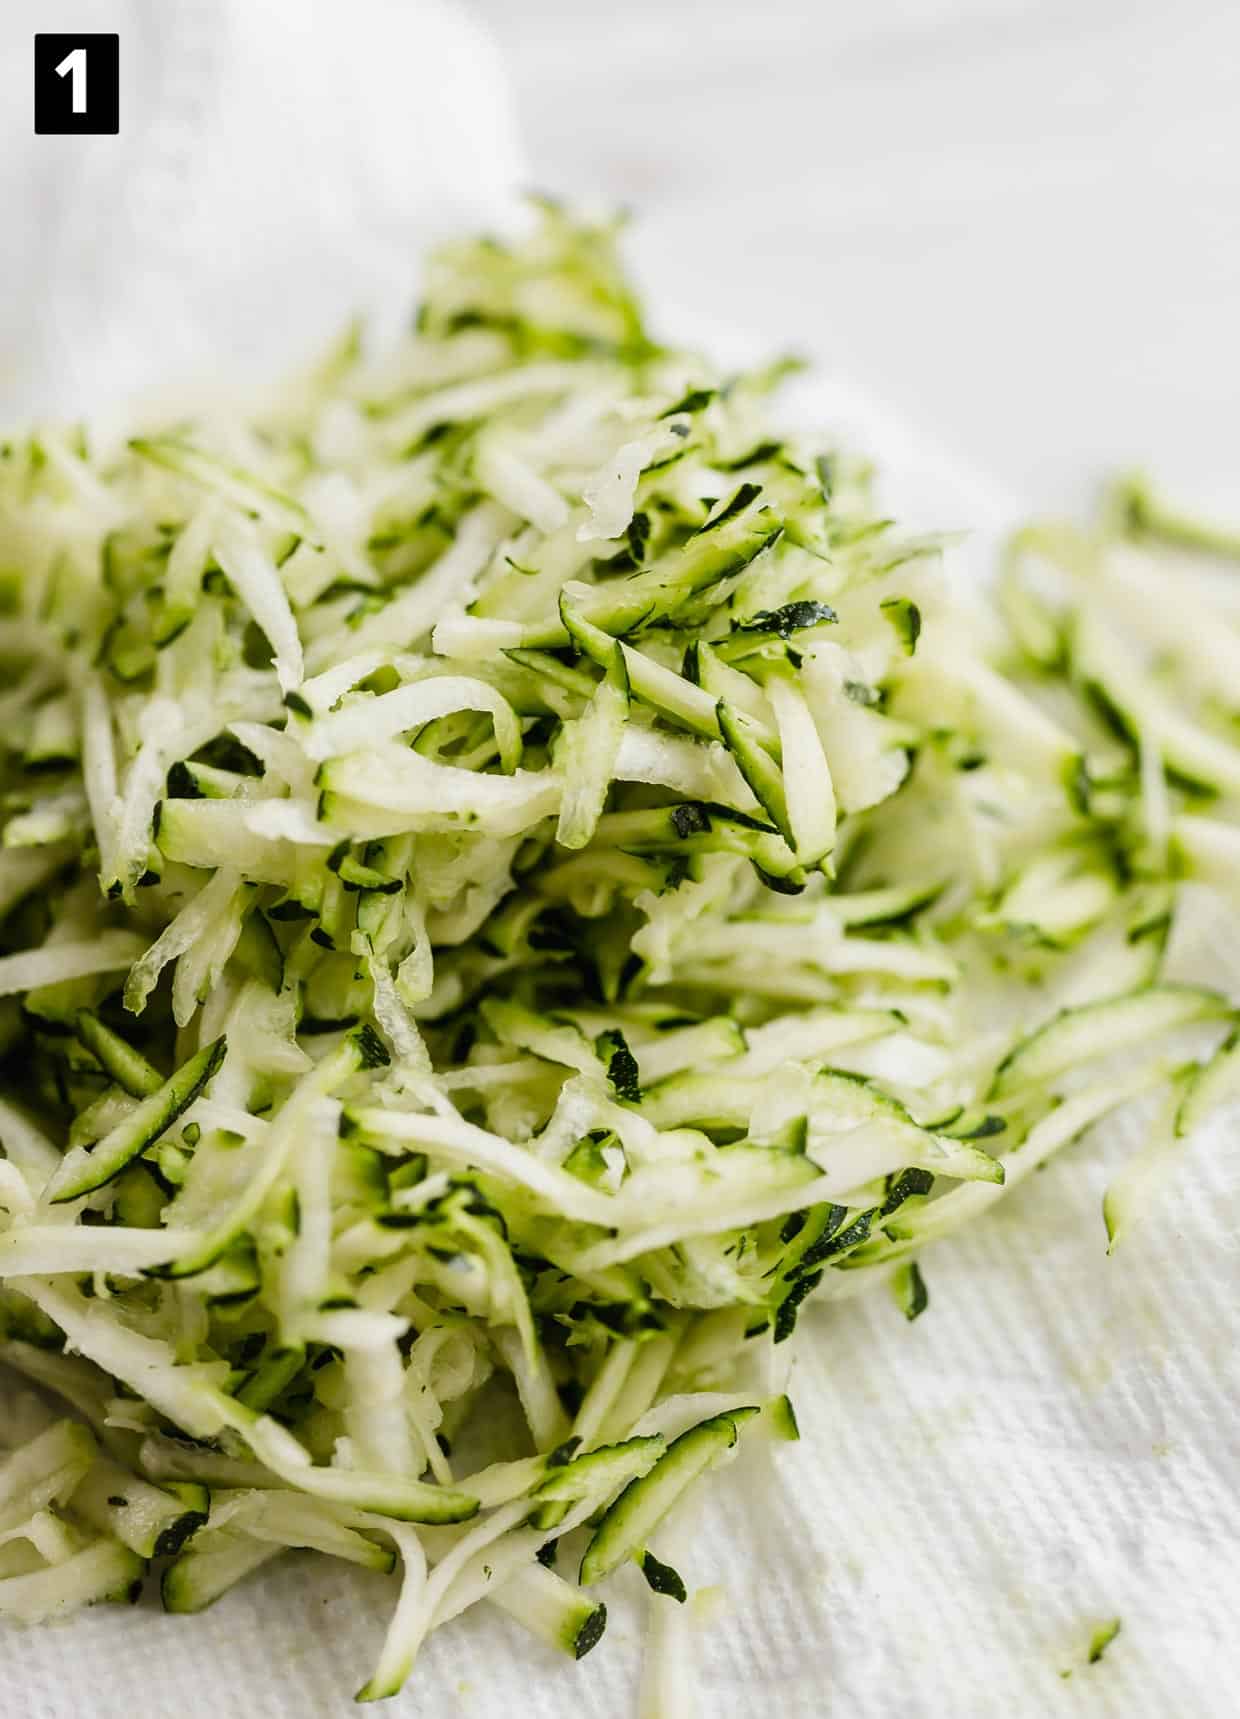 Shredded zucchini on a white paper towel.